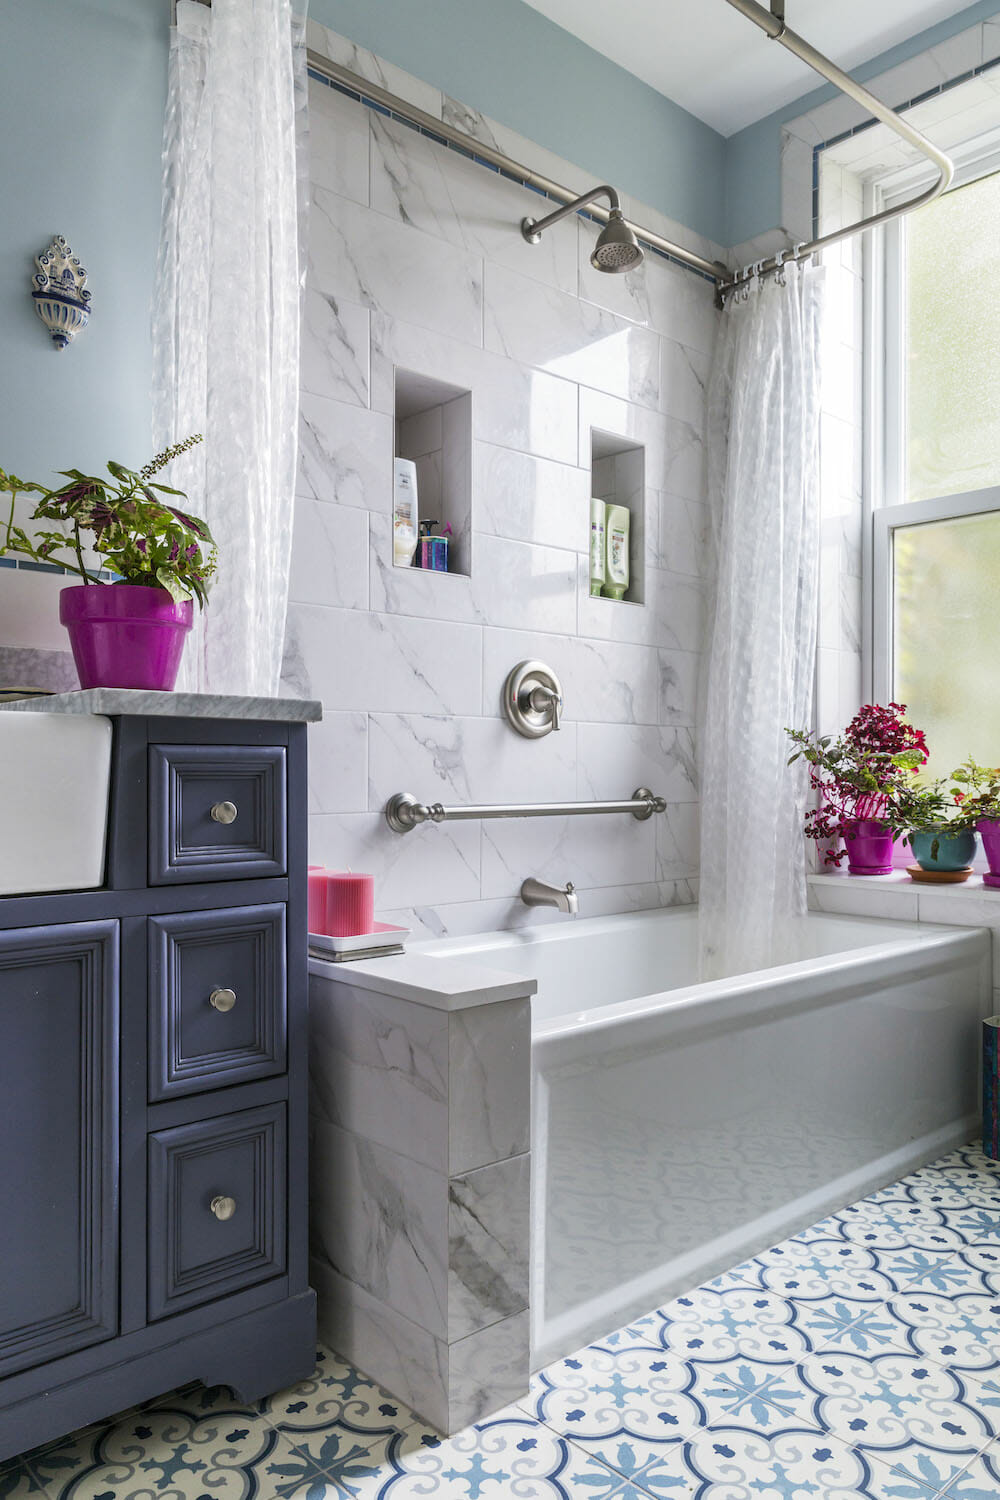 white bathtub and blue vanity in a bathroom with marble walls and blue patterned floor tiles after renovation